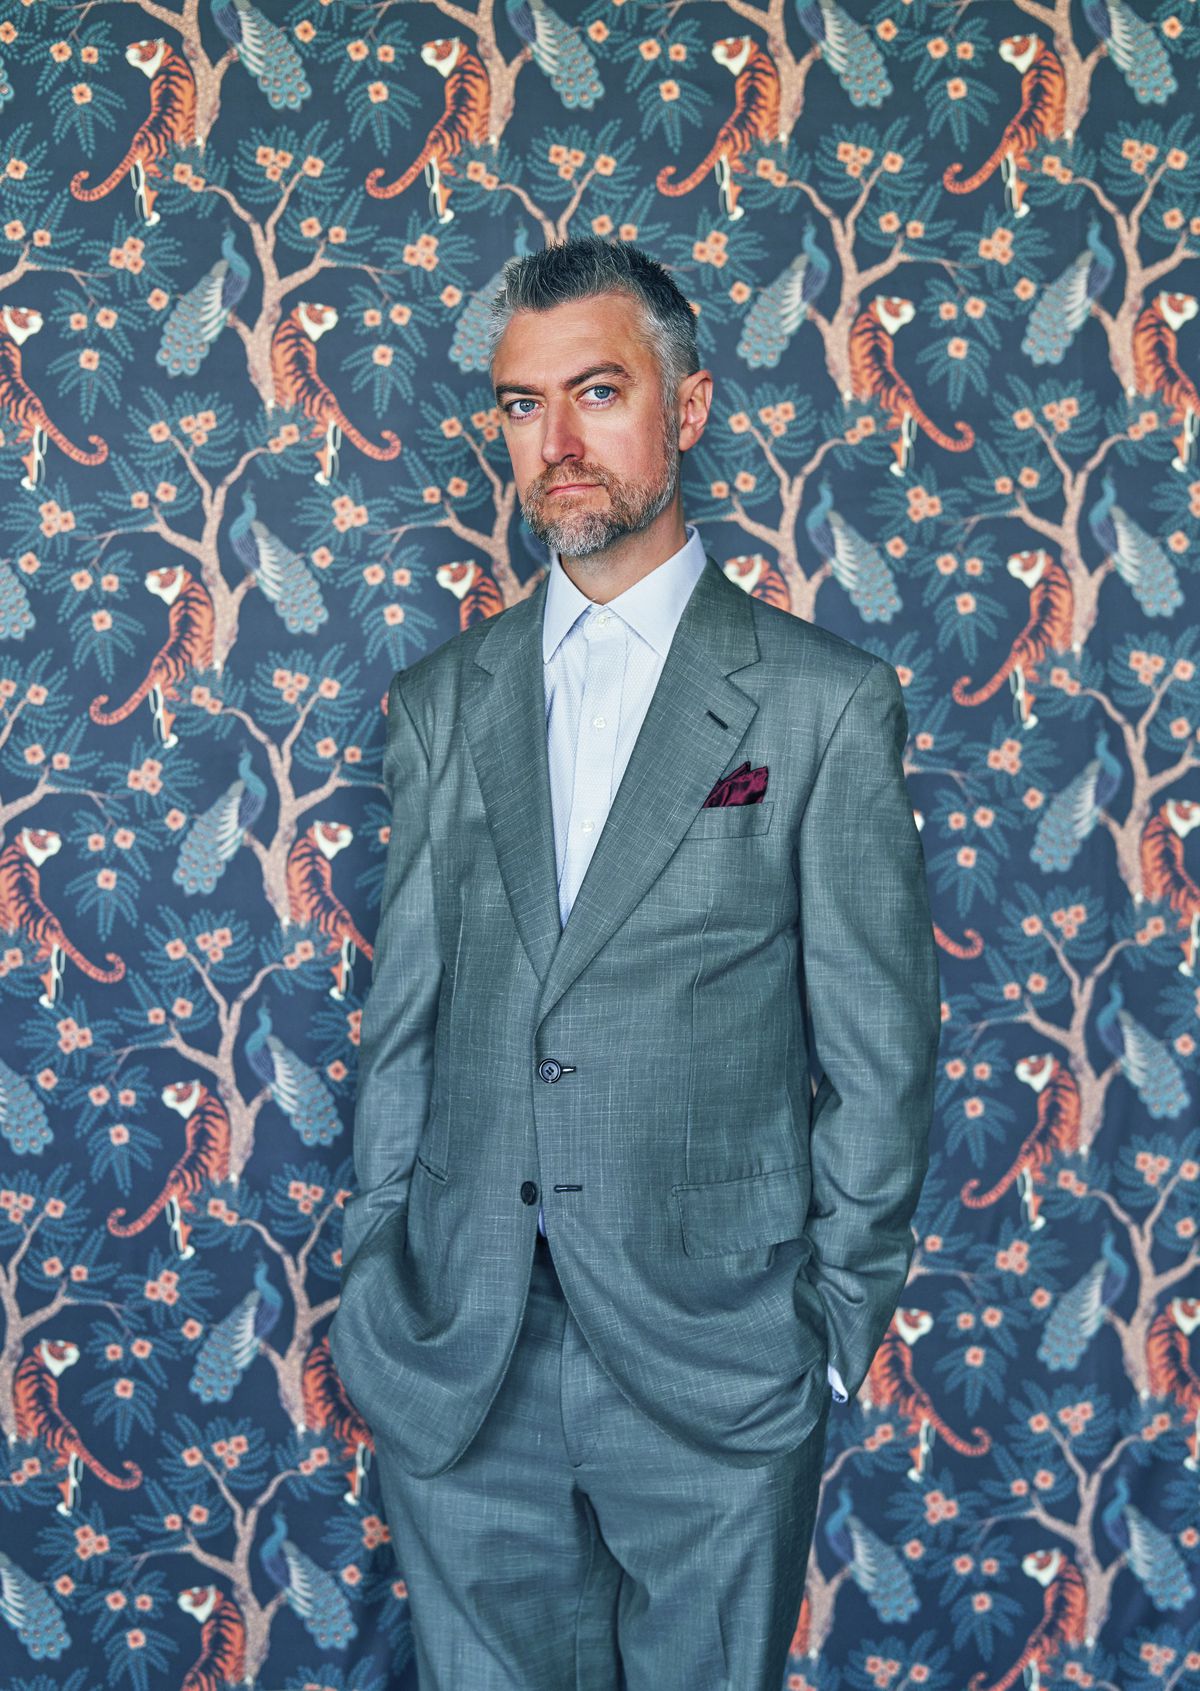 Actor Sean Gunn in a blue suit, standing against a busy background with a repeated pattern of peacocks in trees with tigers below